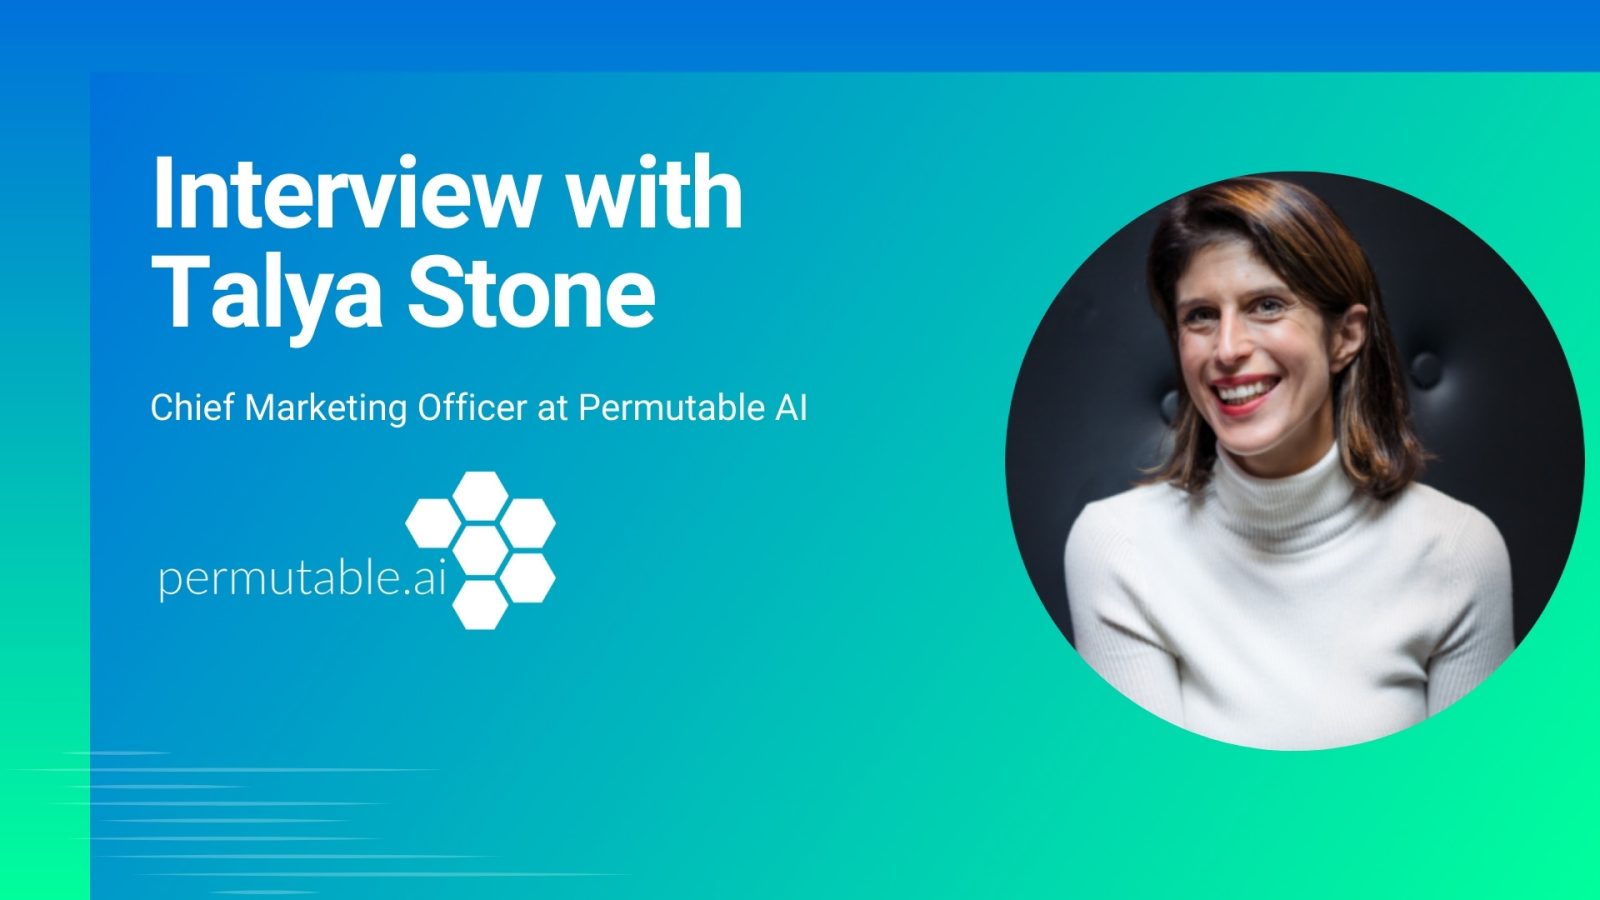 aiTech‌ ‌Trend‌ ‌Interview‌ ‌with‌ Talya Stone, Chief Marketing Officer at Permutable AI